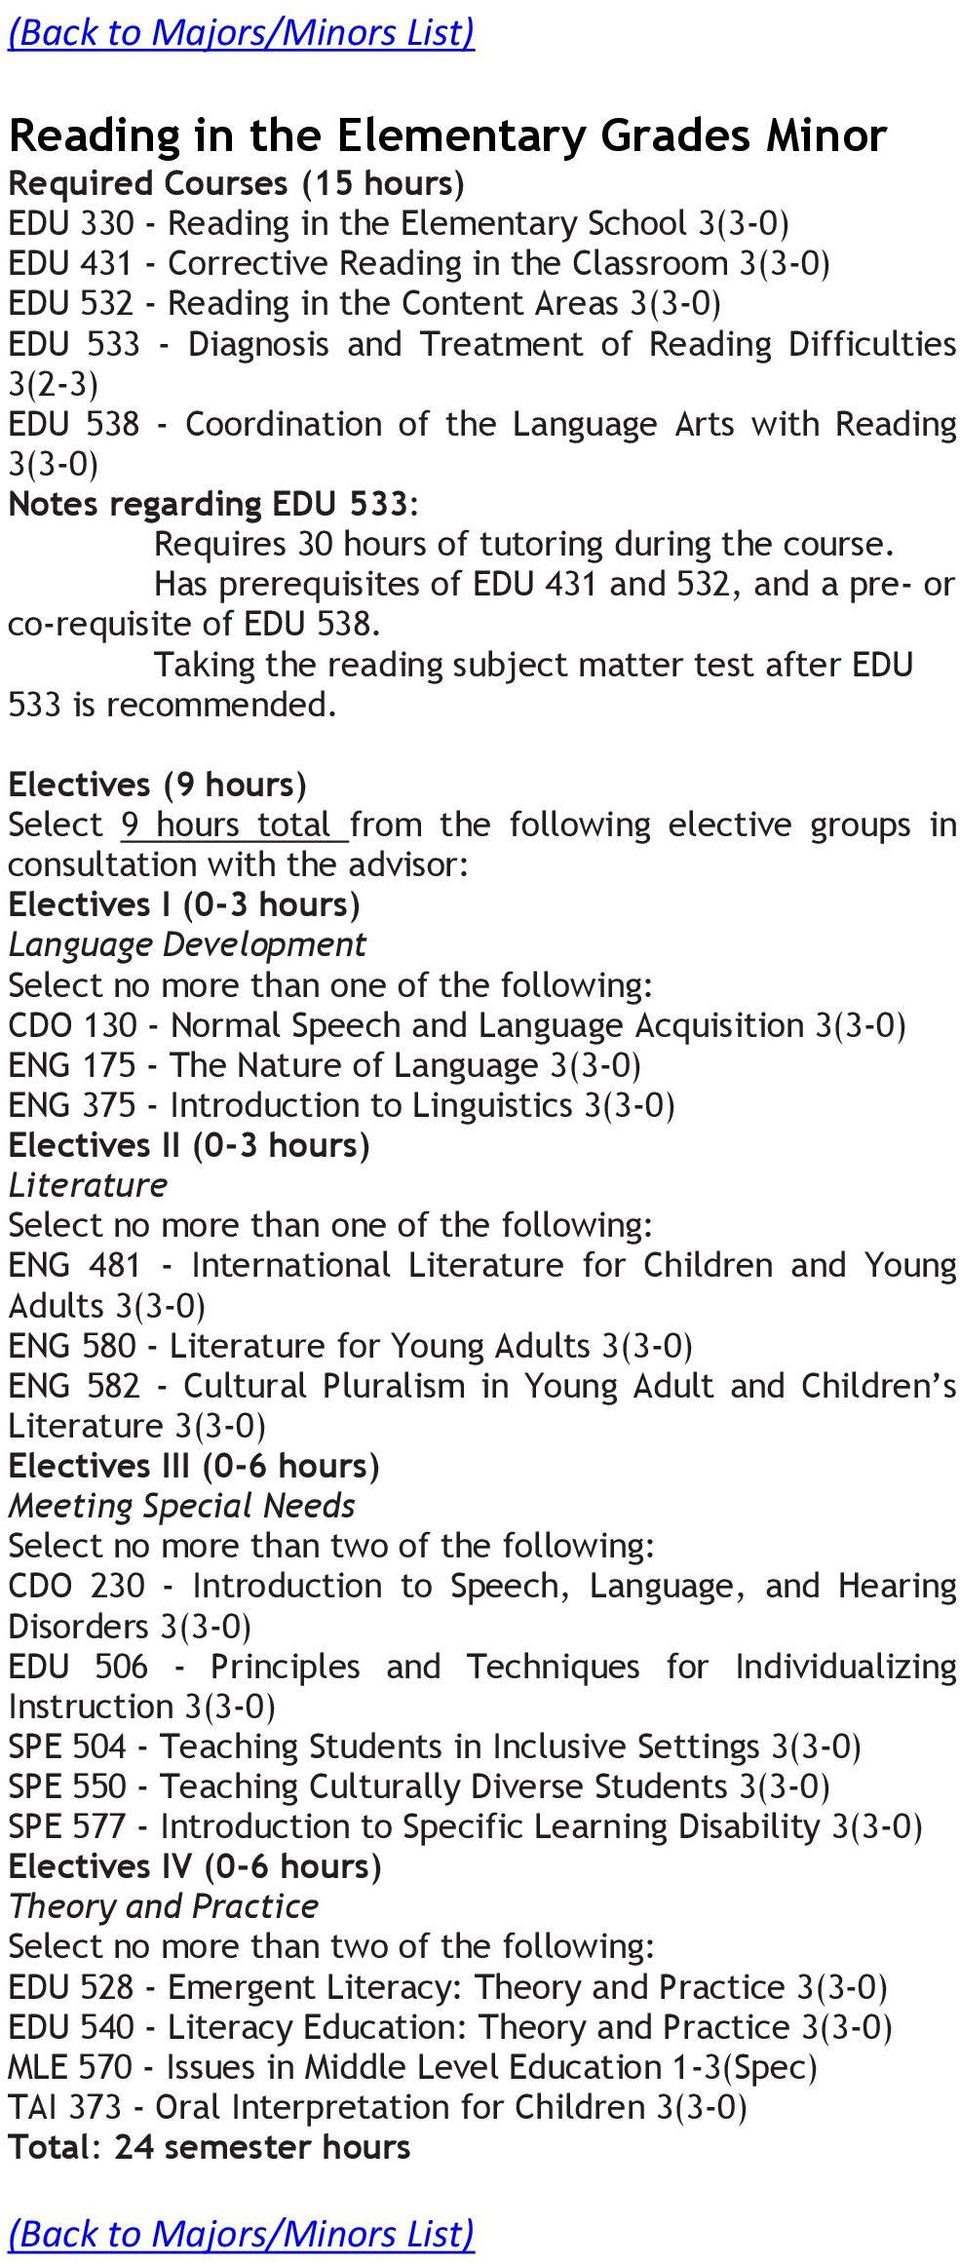 Has prerequisites of EDU 41 and 52, and a pre- or co-requisite of EDU 58. Taking the reading subject matter test after EDU 5 is recommended.